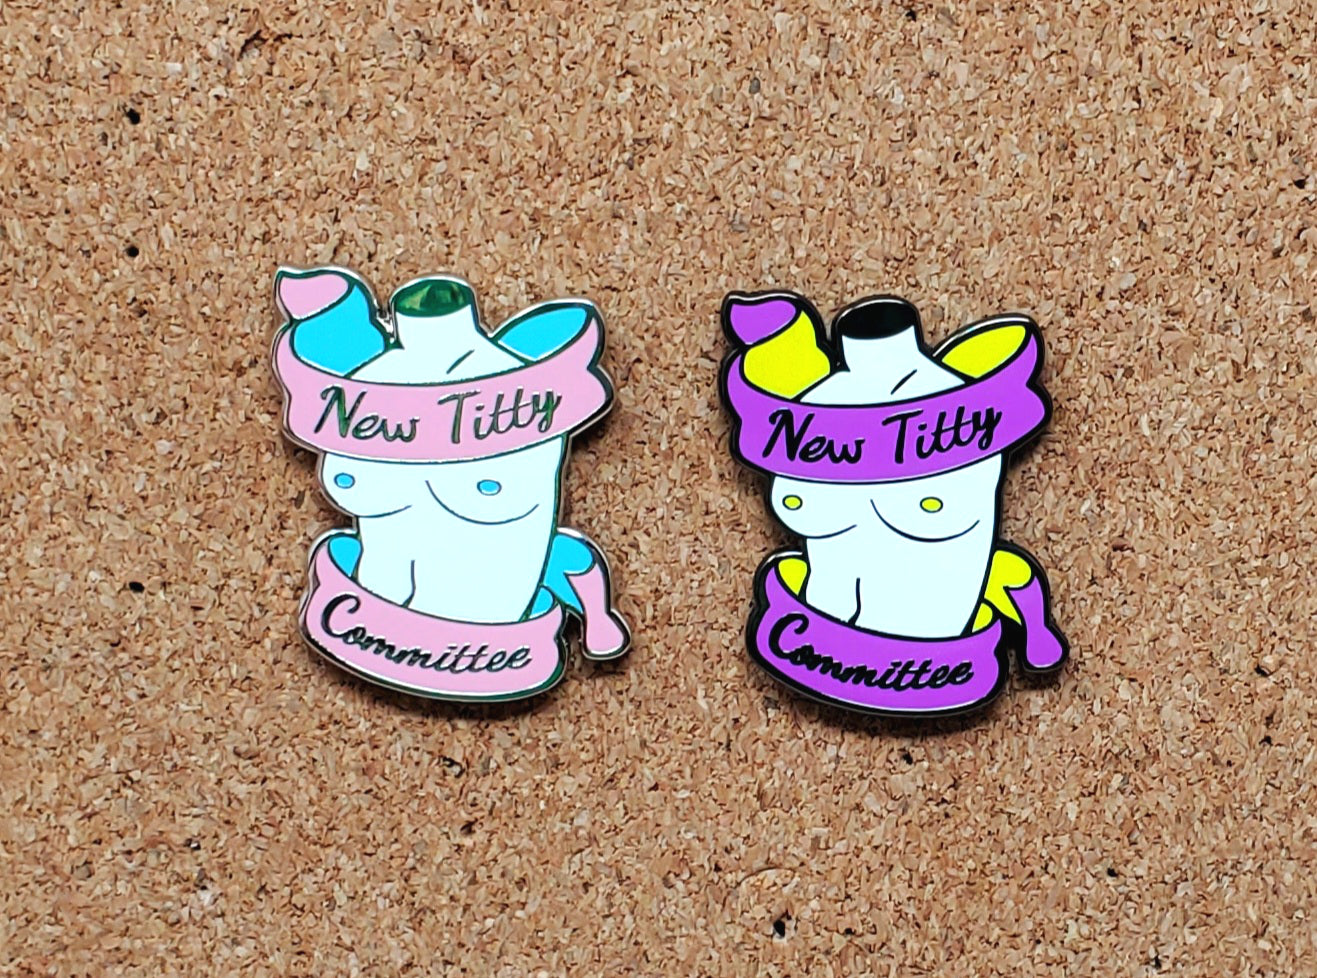 New Titty Committee Top Surgery Pride 1.5” Hard Enamel pin